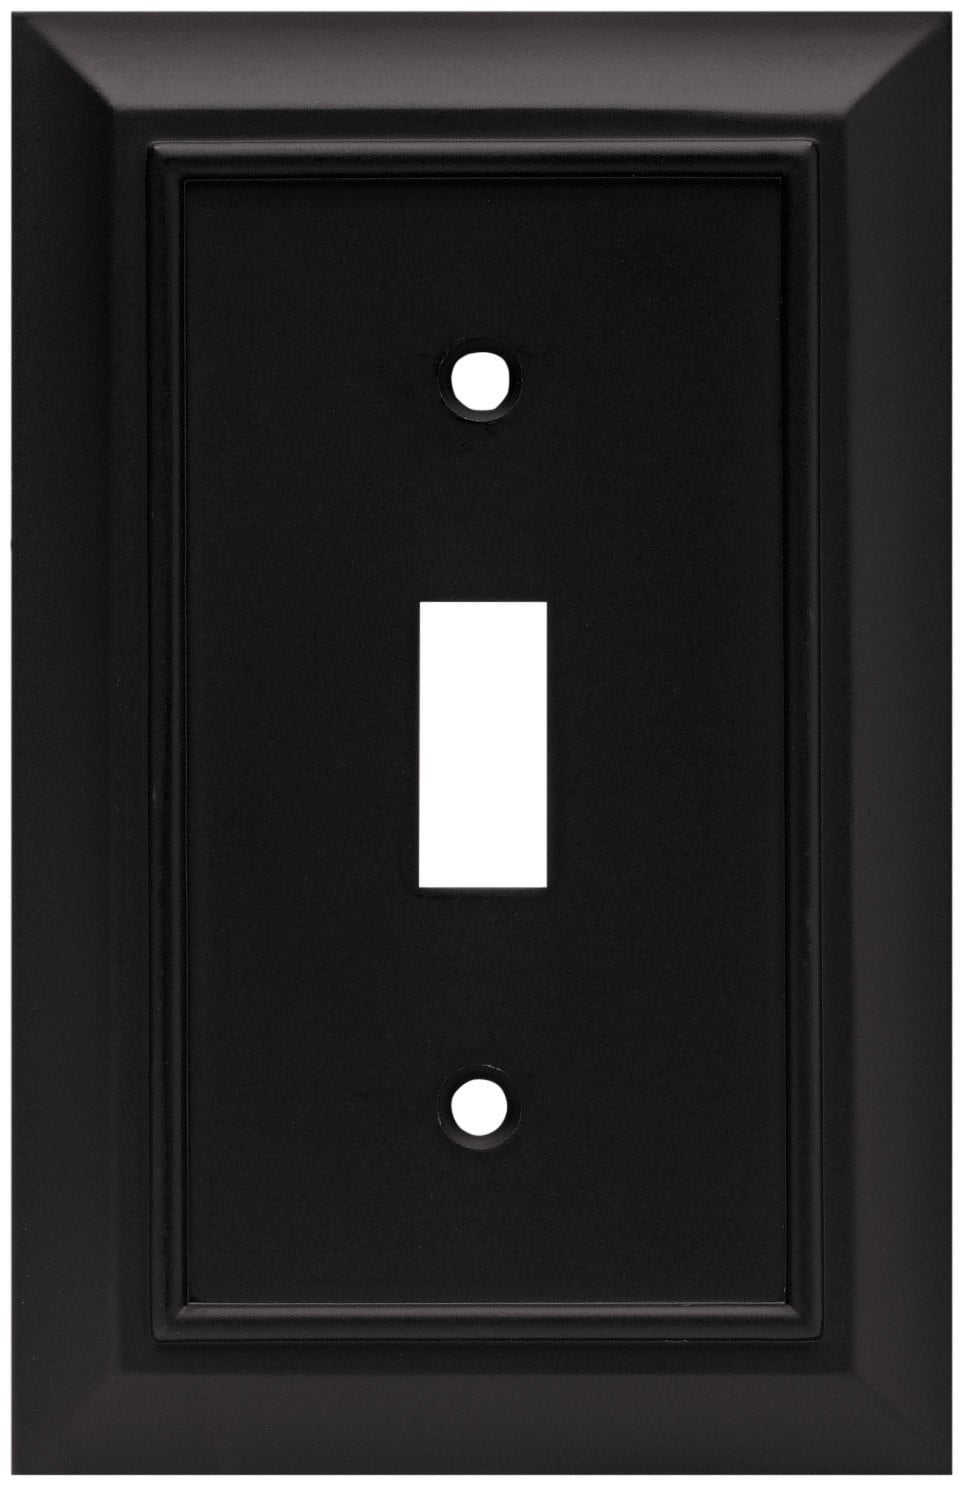 Flat Black Brainerd 64219 Architectural Single Toggle Switch Wall Plate/Switch Plate/Cover 